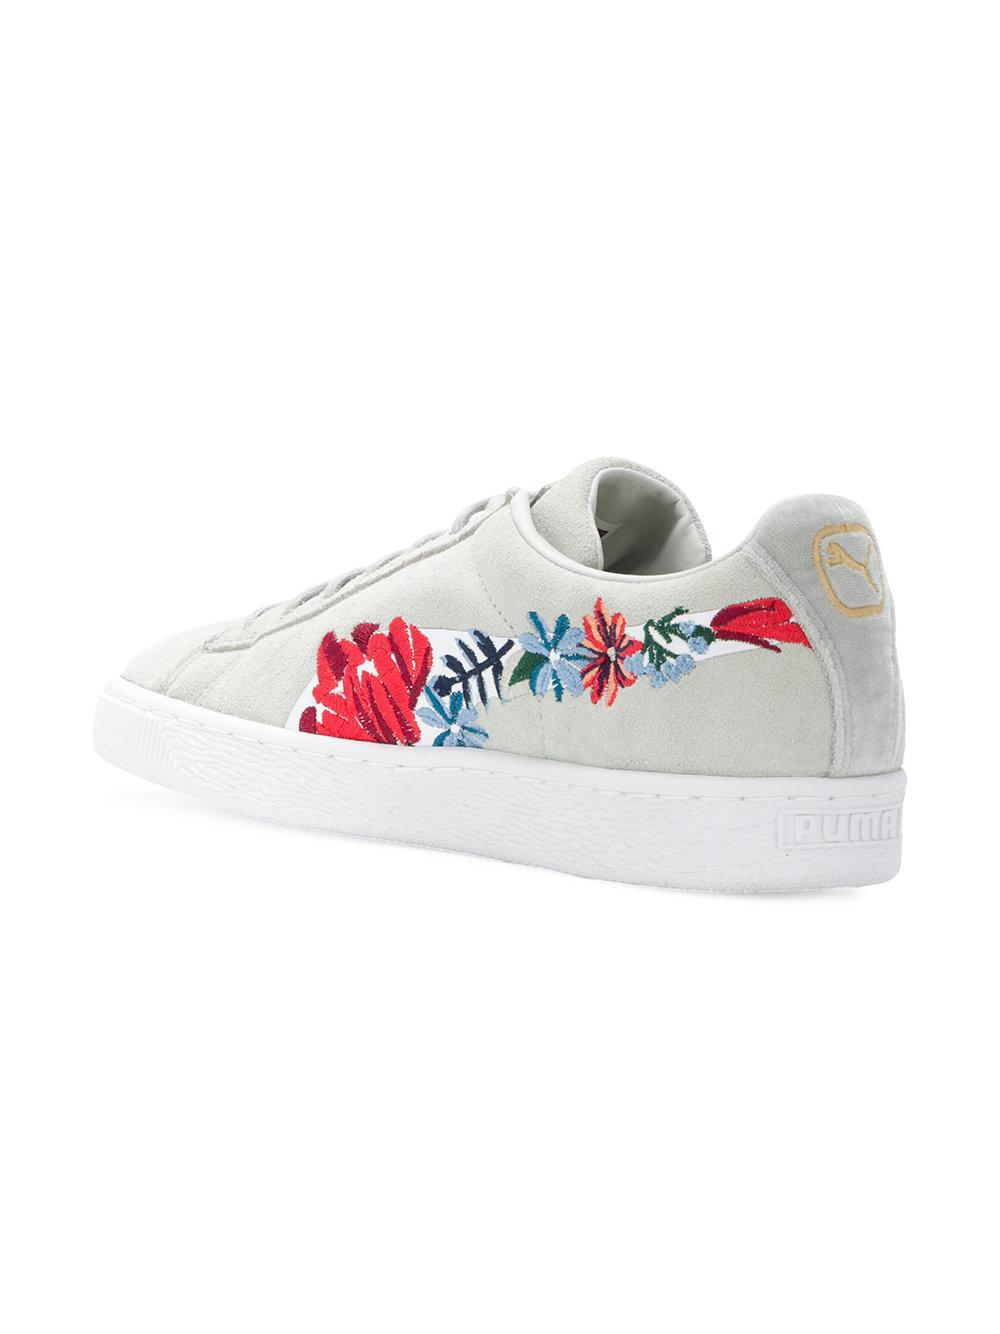 puma suede embroidered